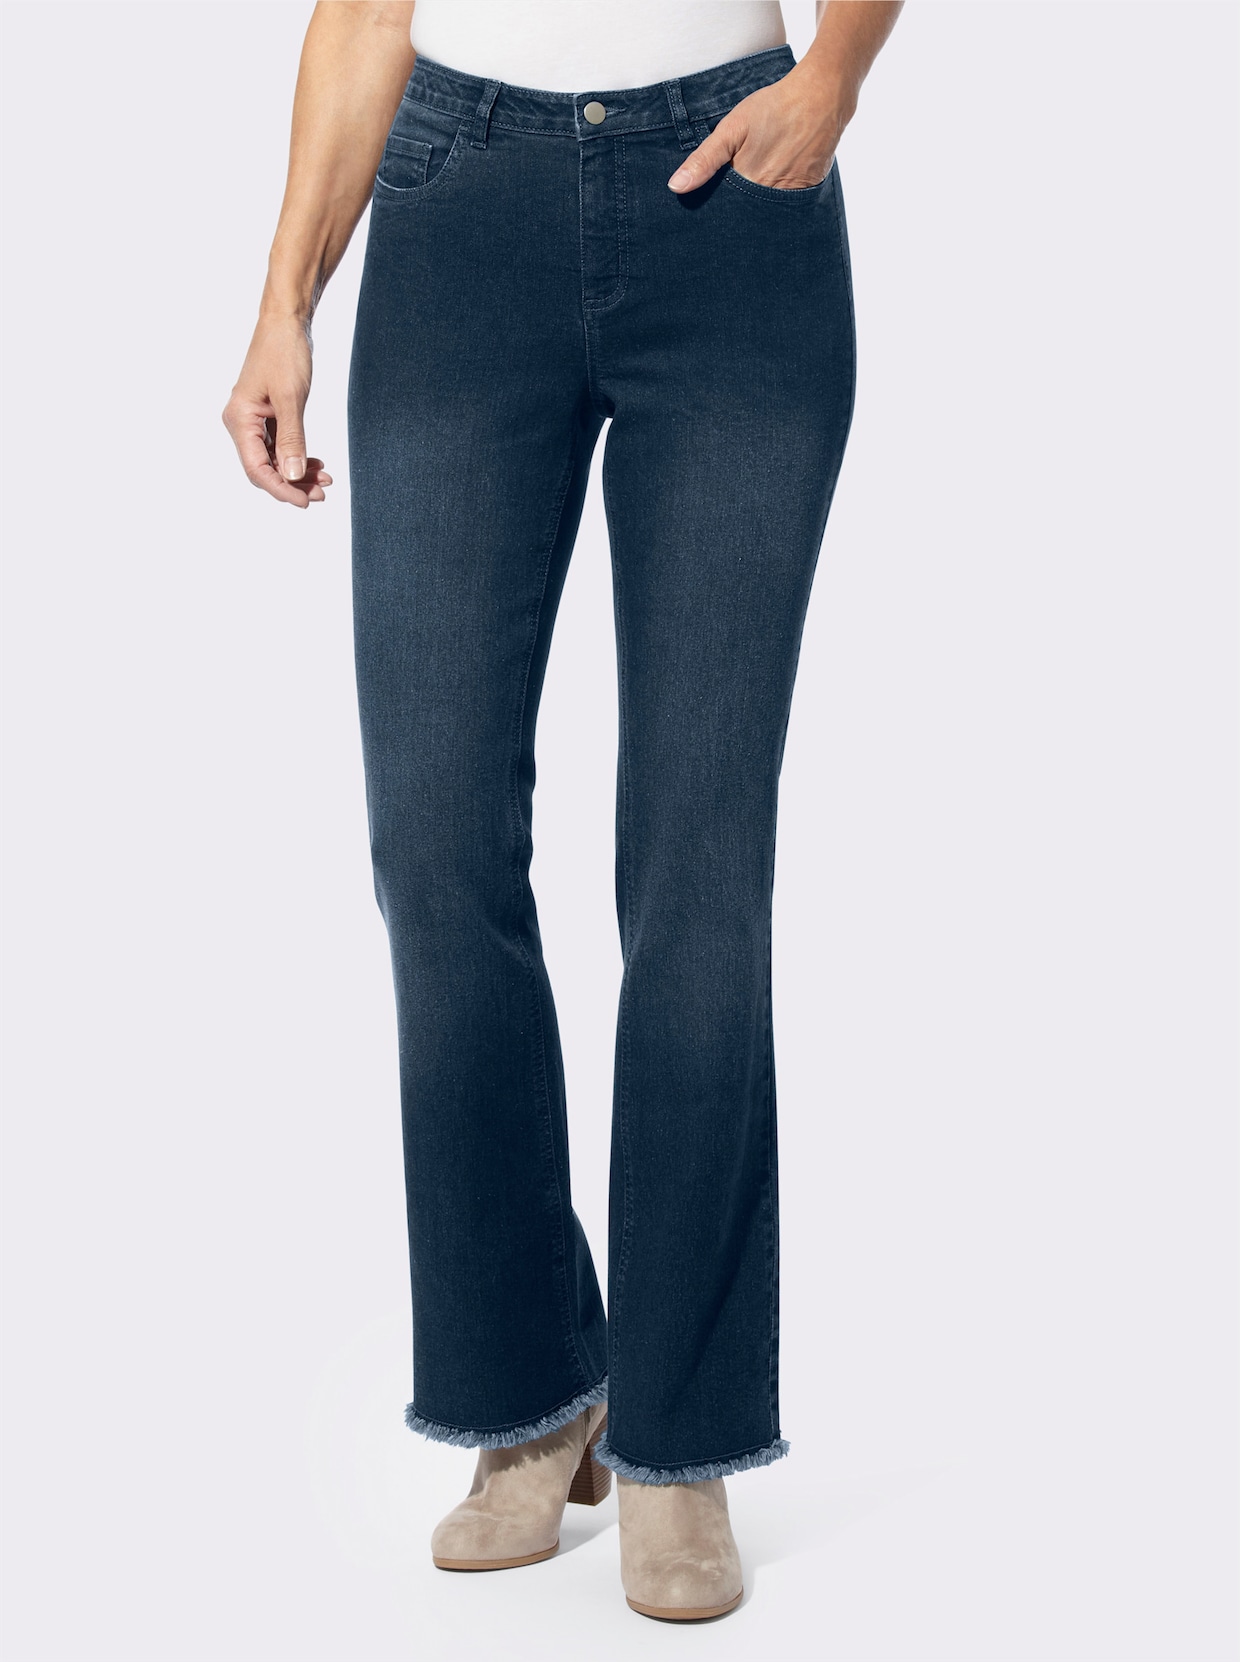 Bootcutjeans - blue-stone-washed